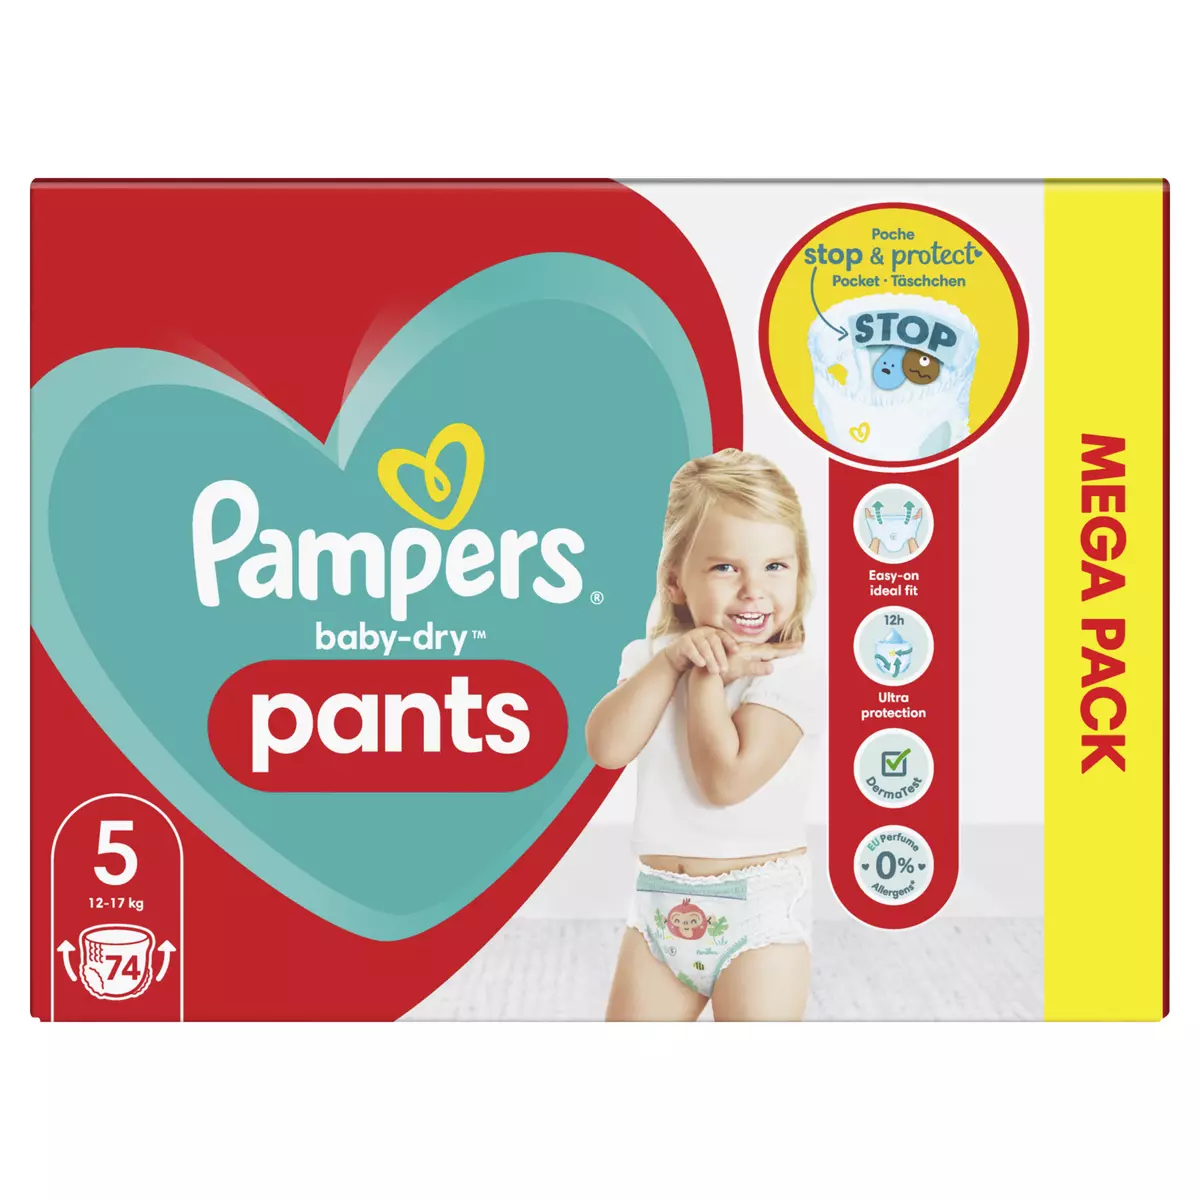 Pampers Bébé Dry Couches Taille 5 Pièces 23 Couches